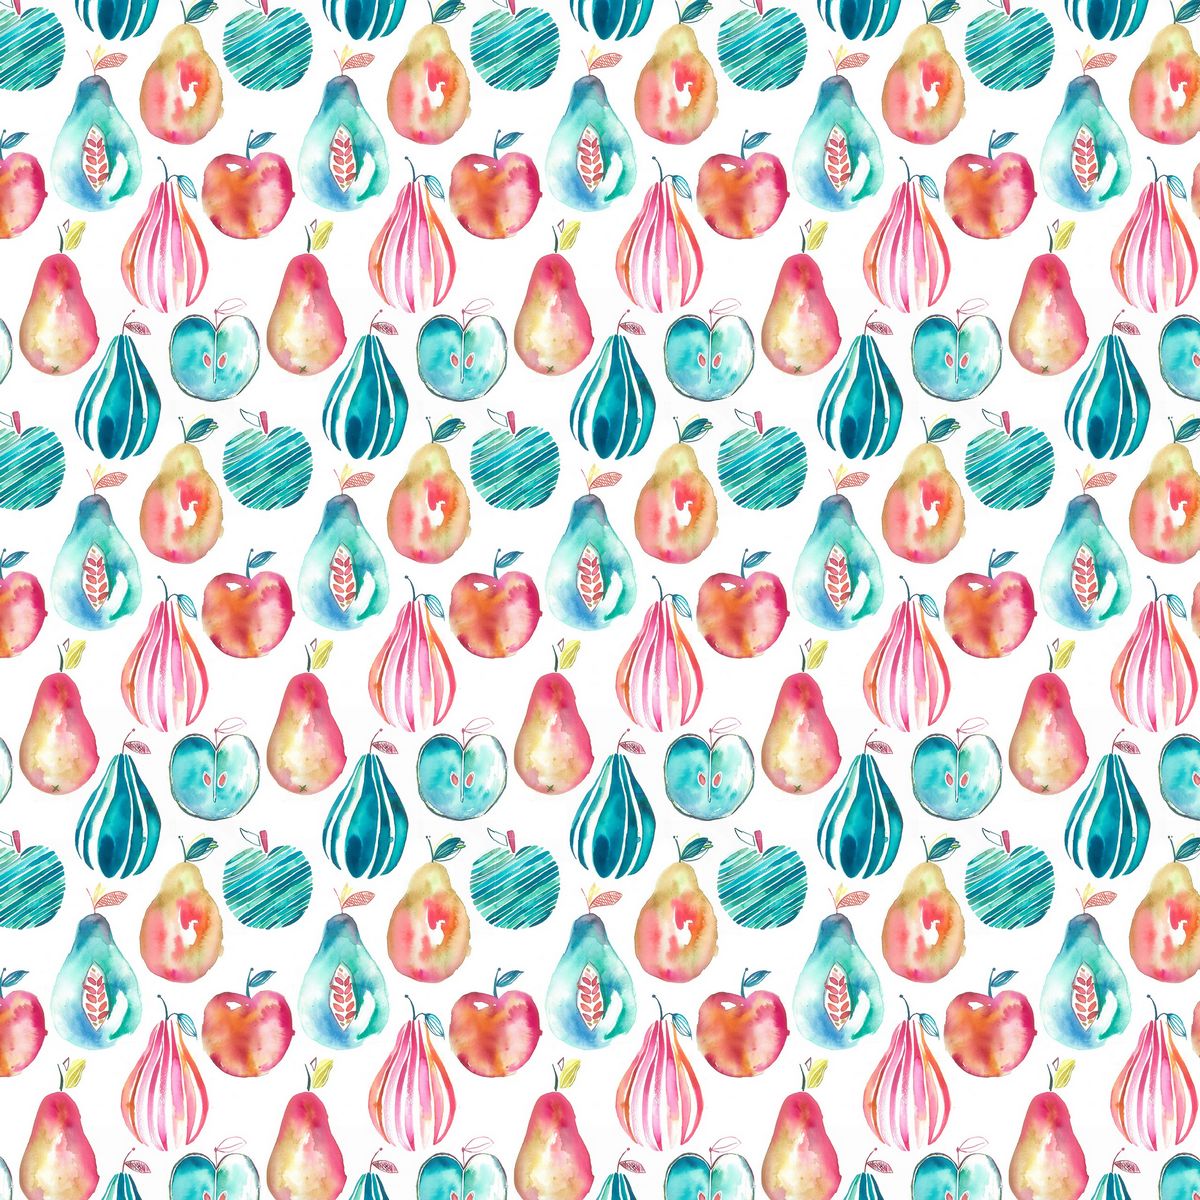 Pears Carnival Fabric by Voyage Maison